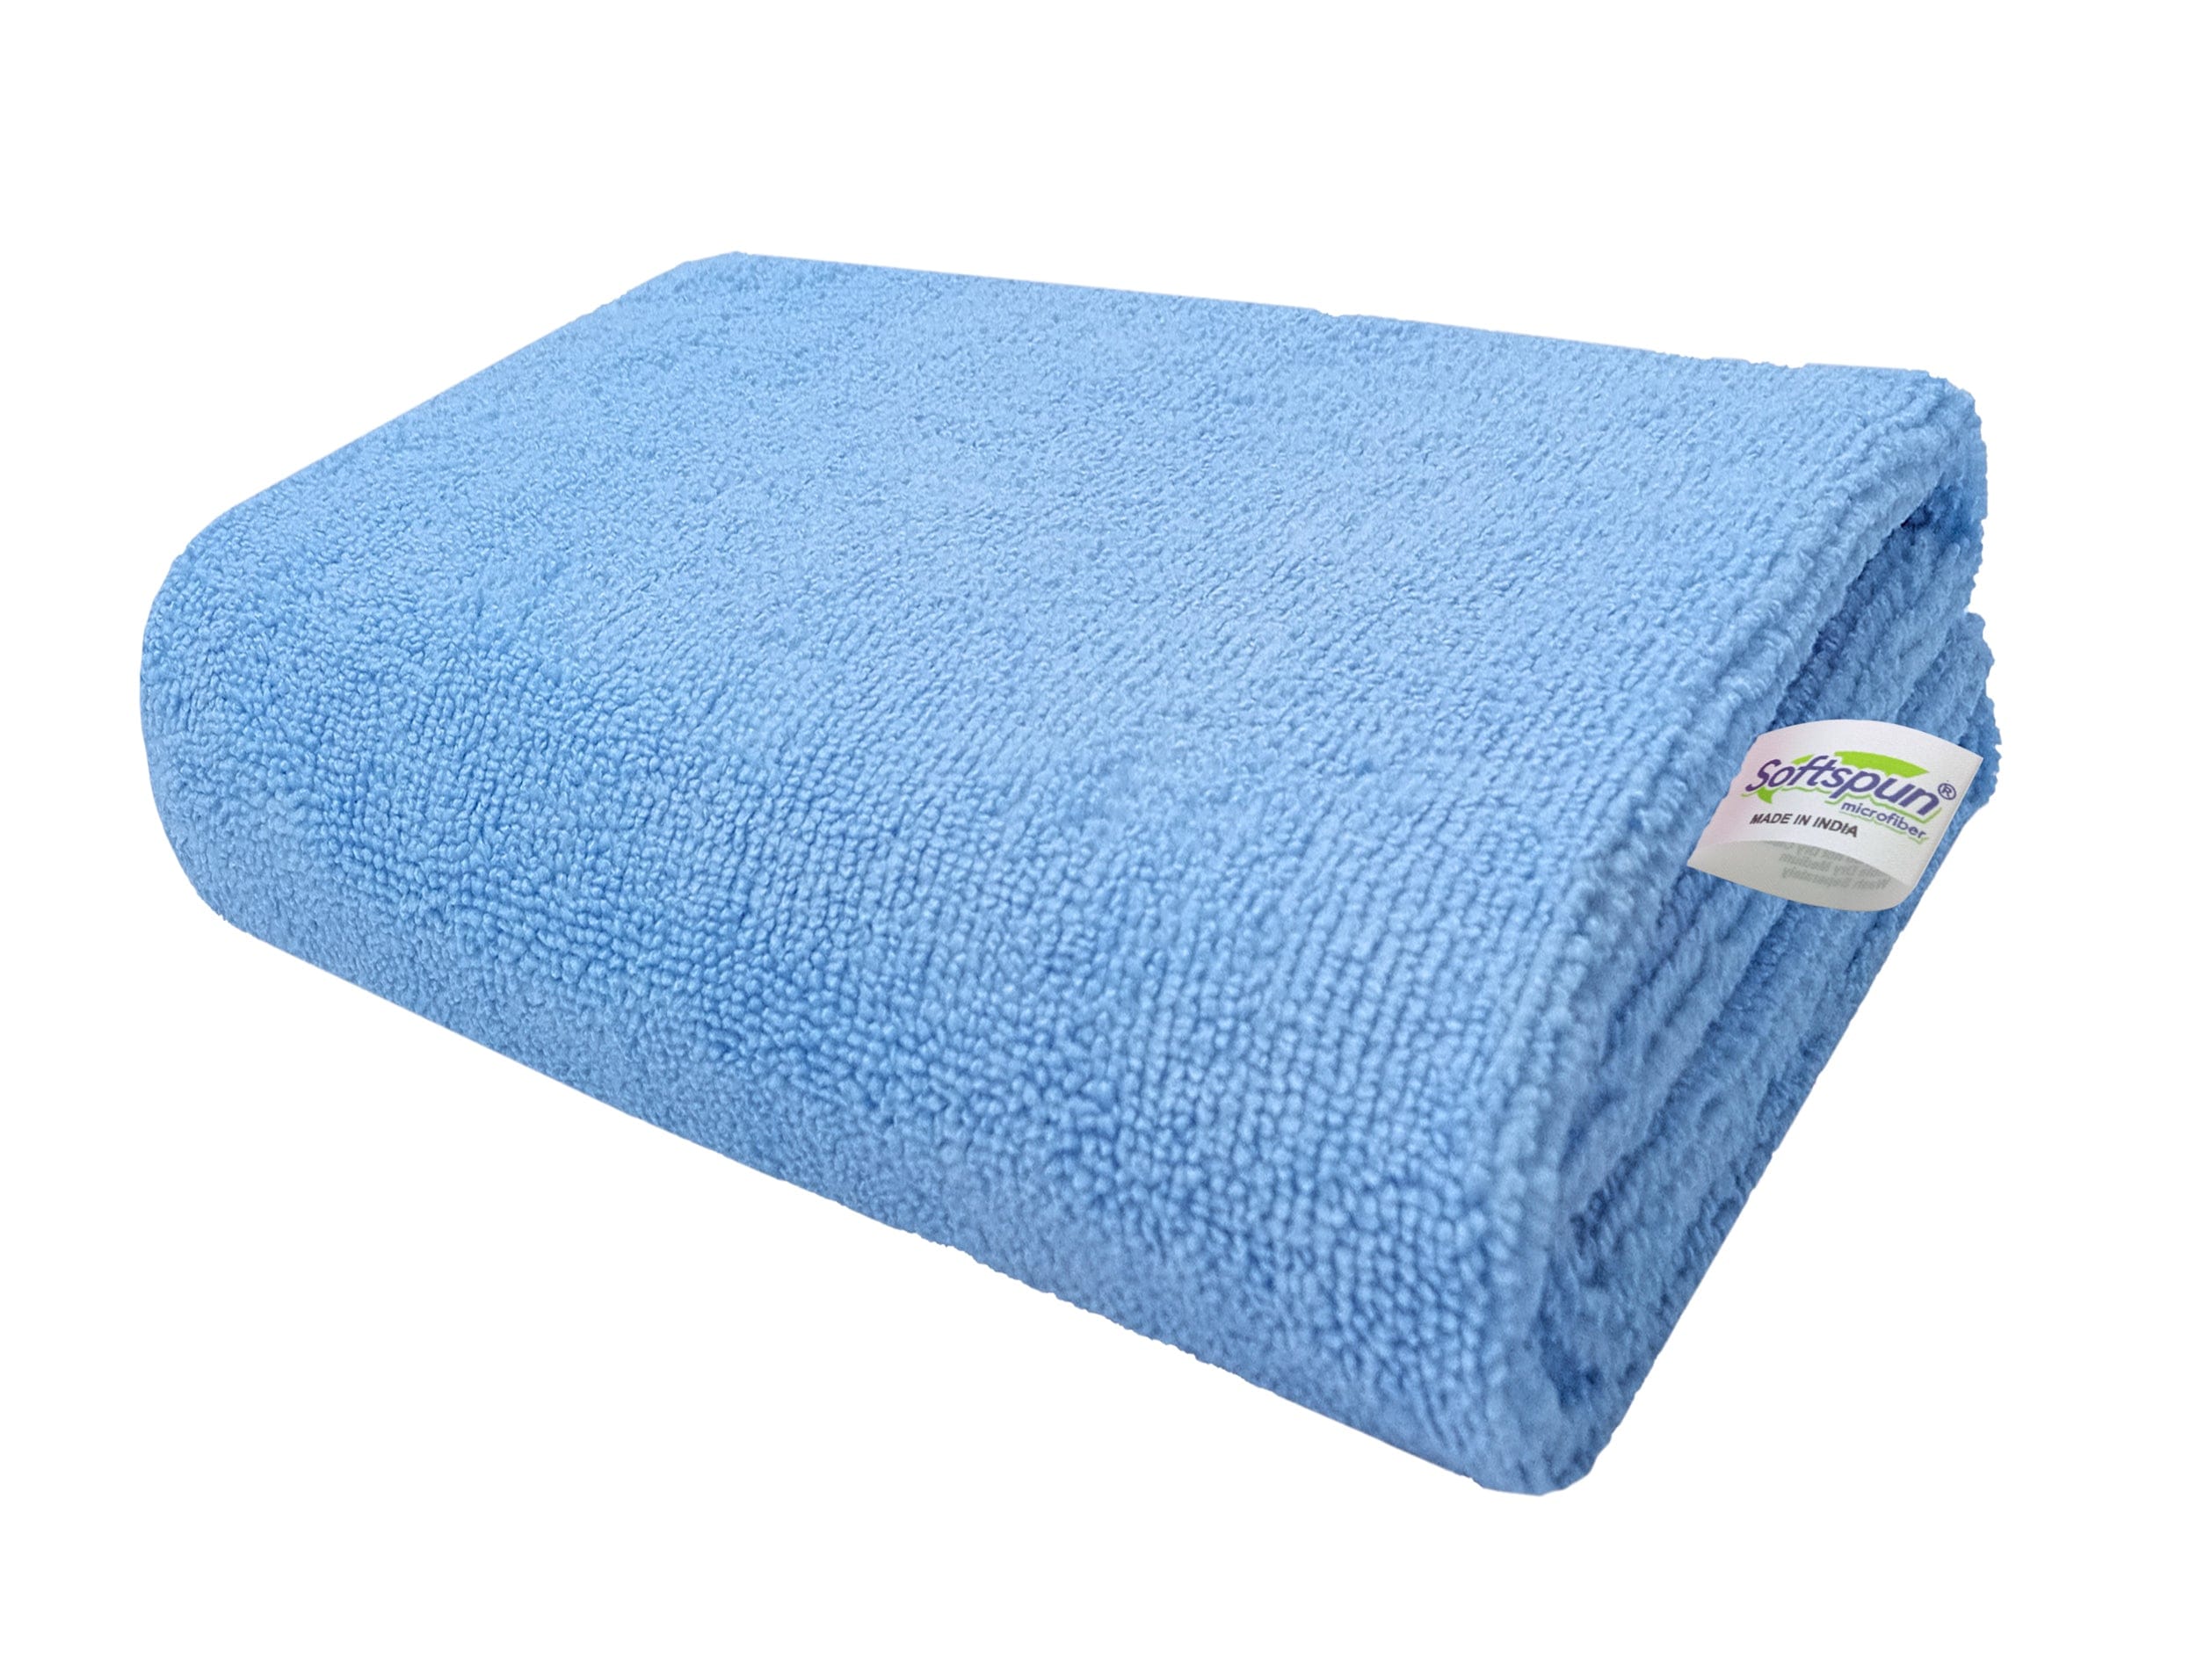 SOFTSPUN Microfiber Hair and Face Care Towel Set of 1 Piece, 340 GSM. Super Soft & Comfortable, Quick Drying, Ultra Absorbent in Large Size.